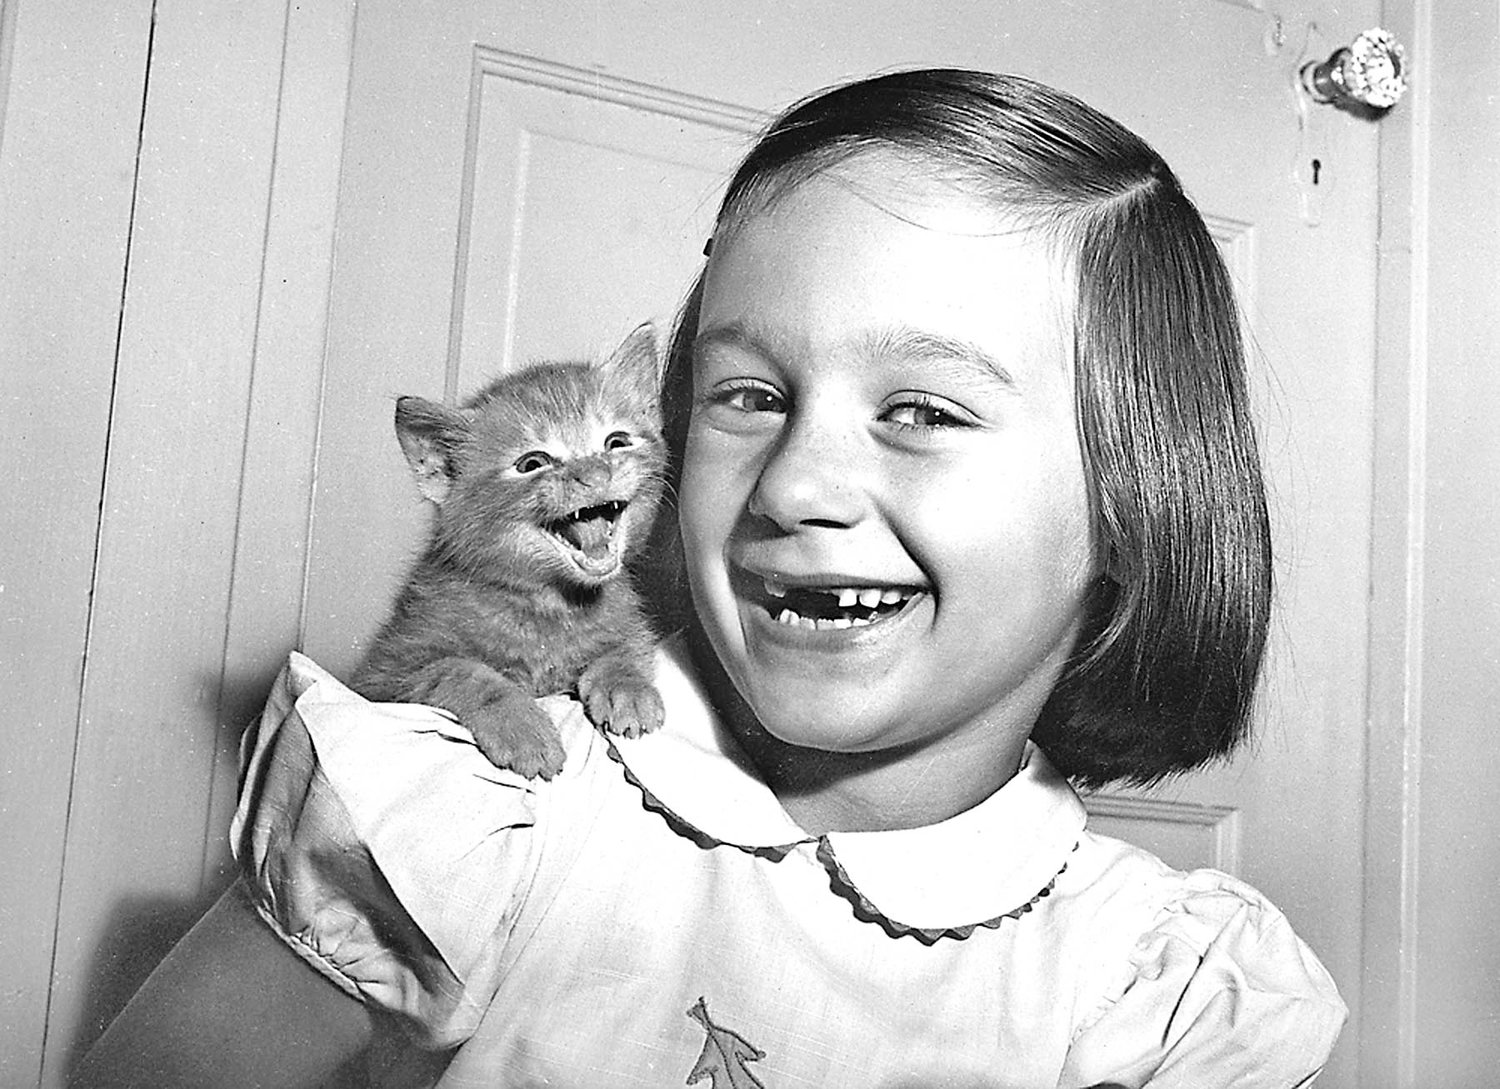 This photograph of a young girl and kitten, both smiling, is by Walter Chandoha.